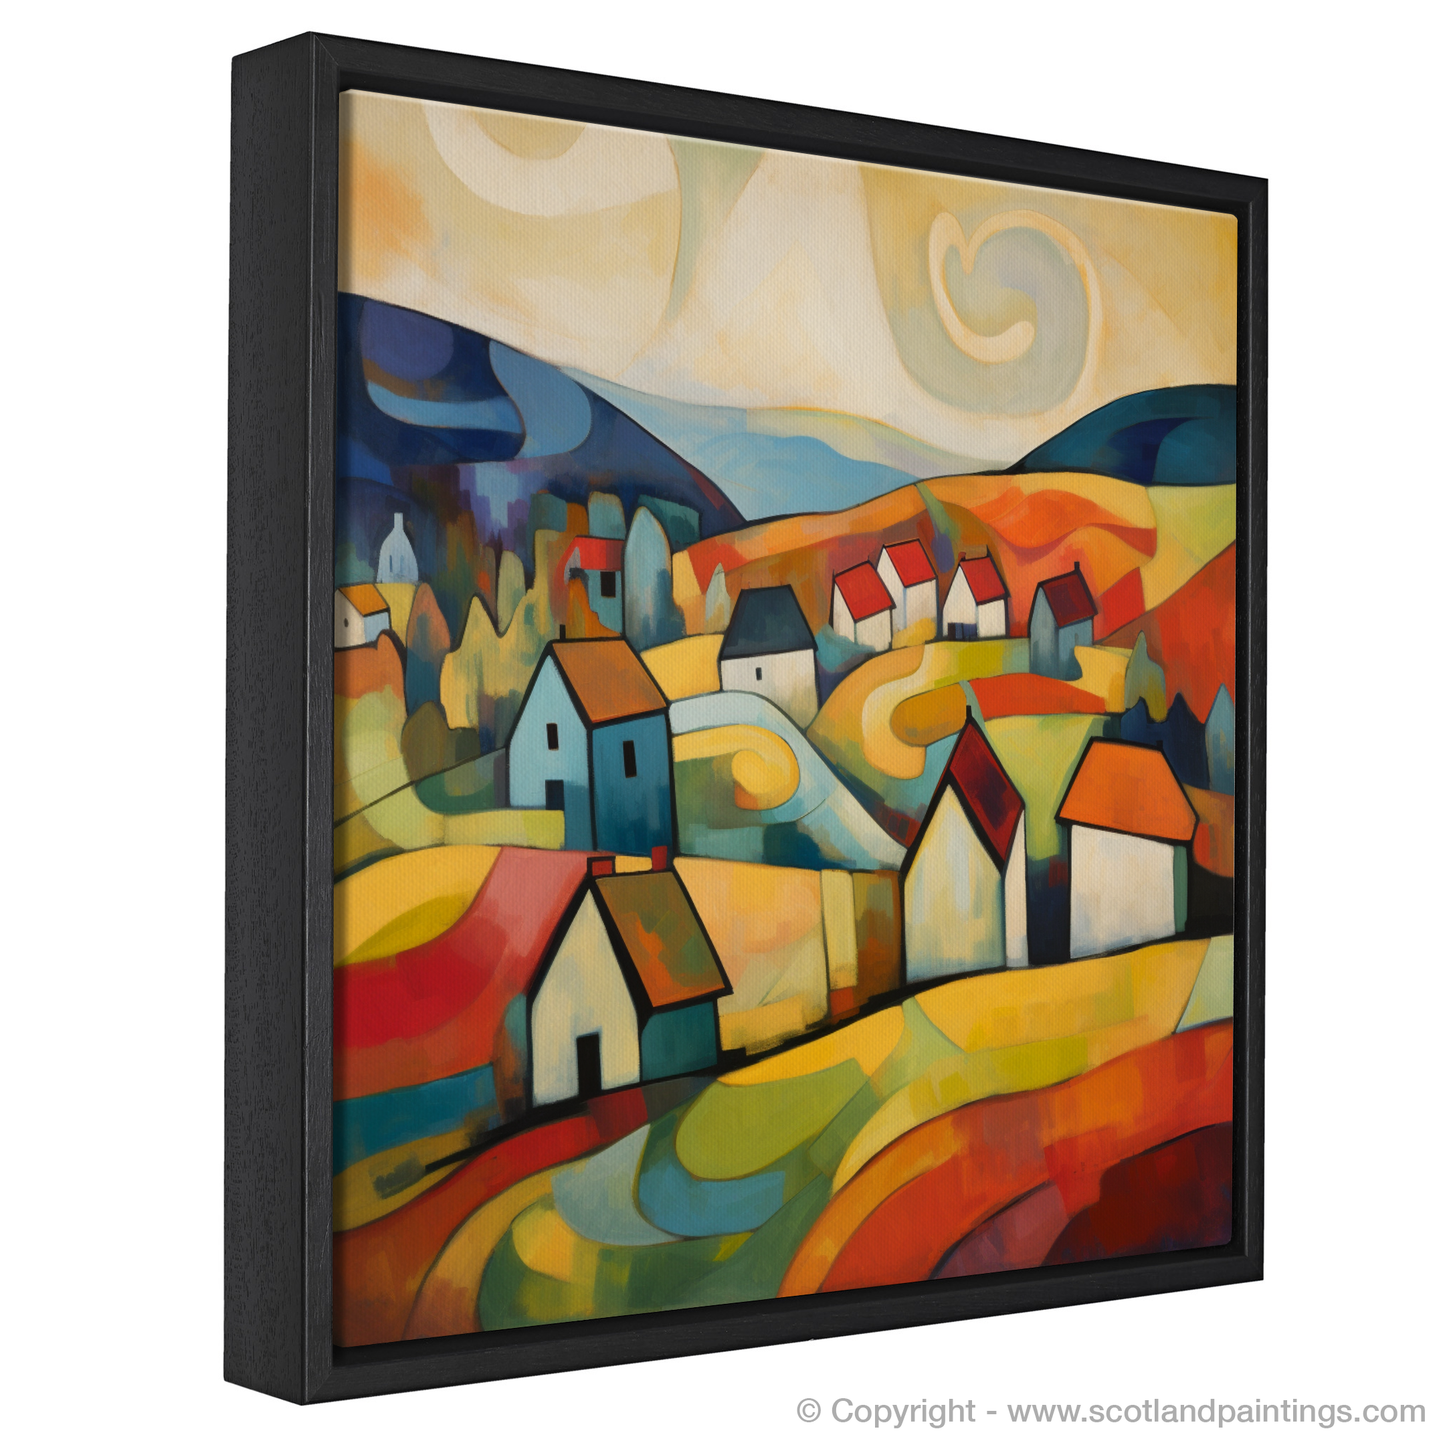 Painting and Art Print of Glenmore, Highlands entitled "Glenmore Reverie: An Abstract Highland Odyssey".